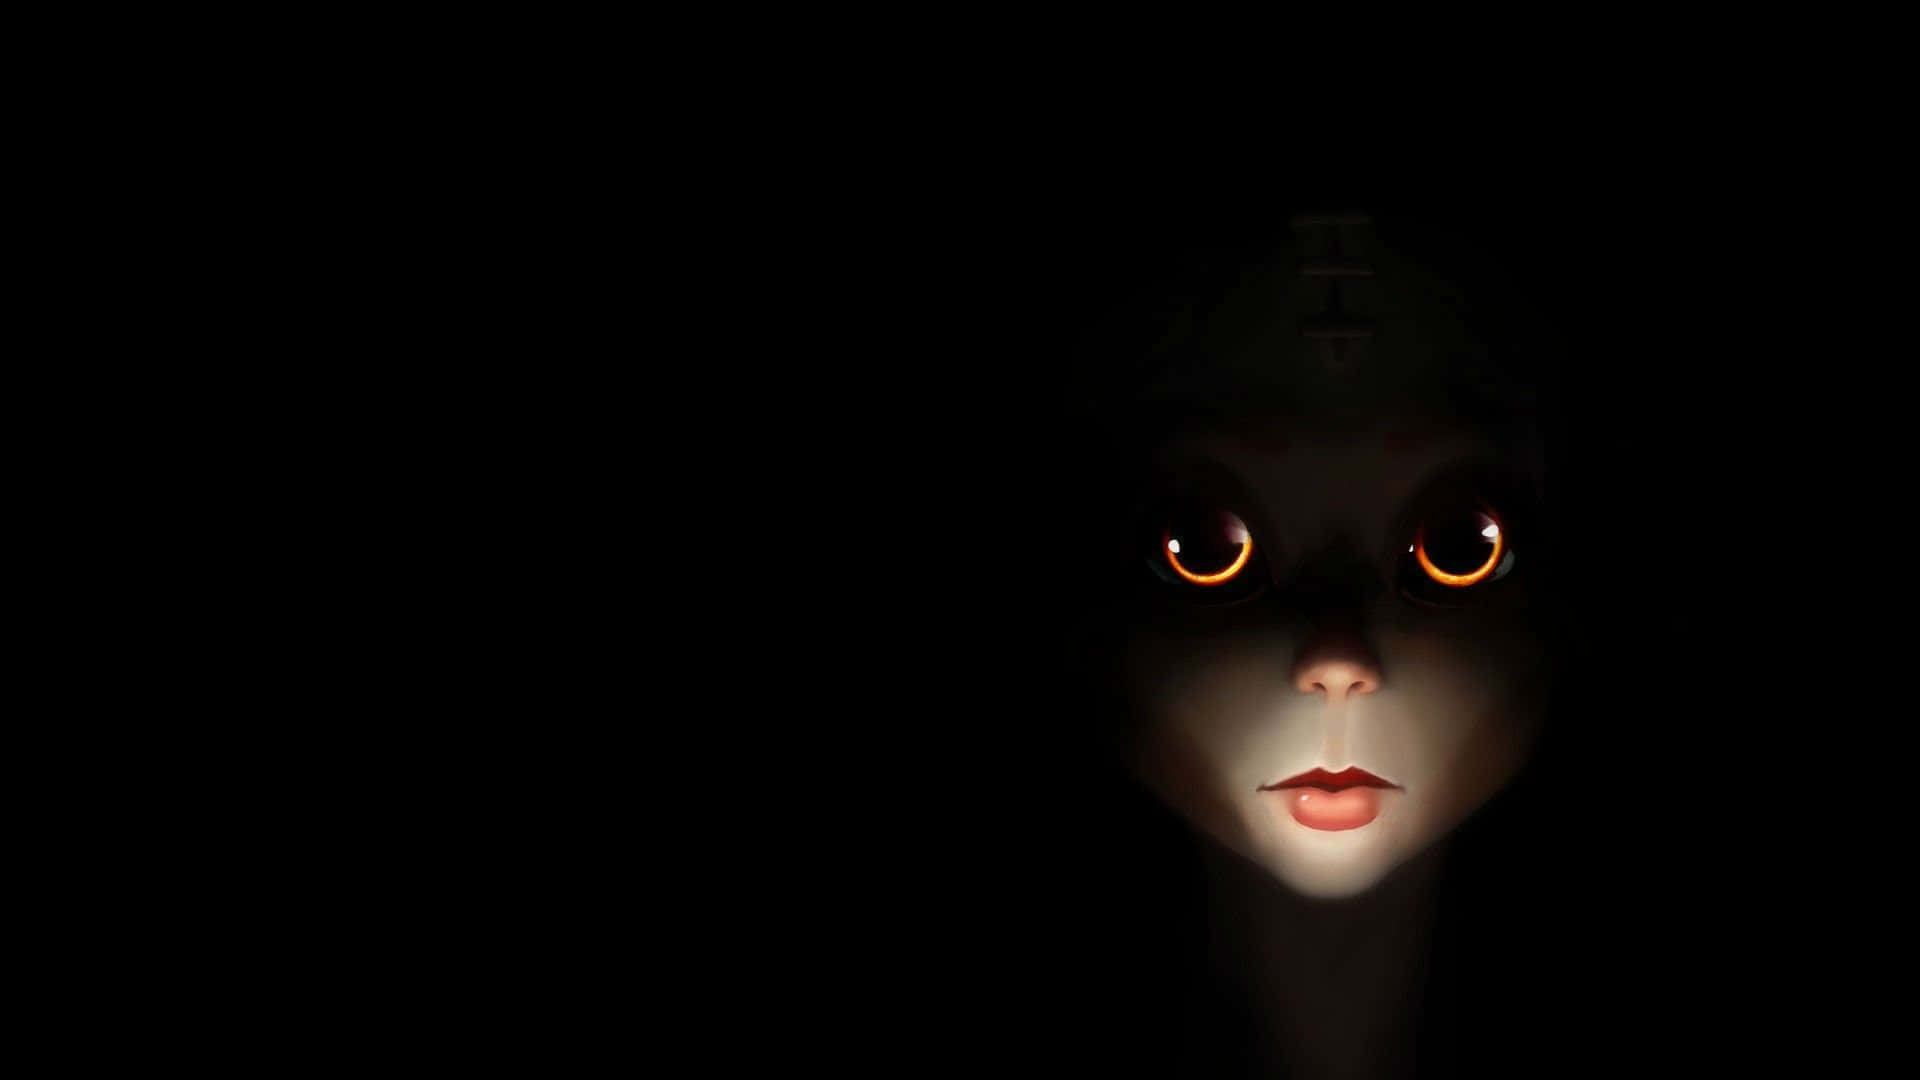 Enter the Dark and Unsettling World of Your Imagination Wallpaper